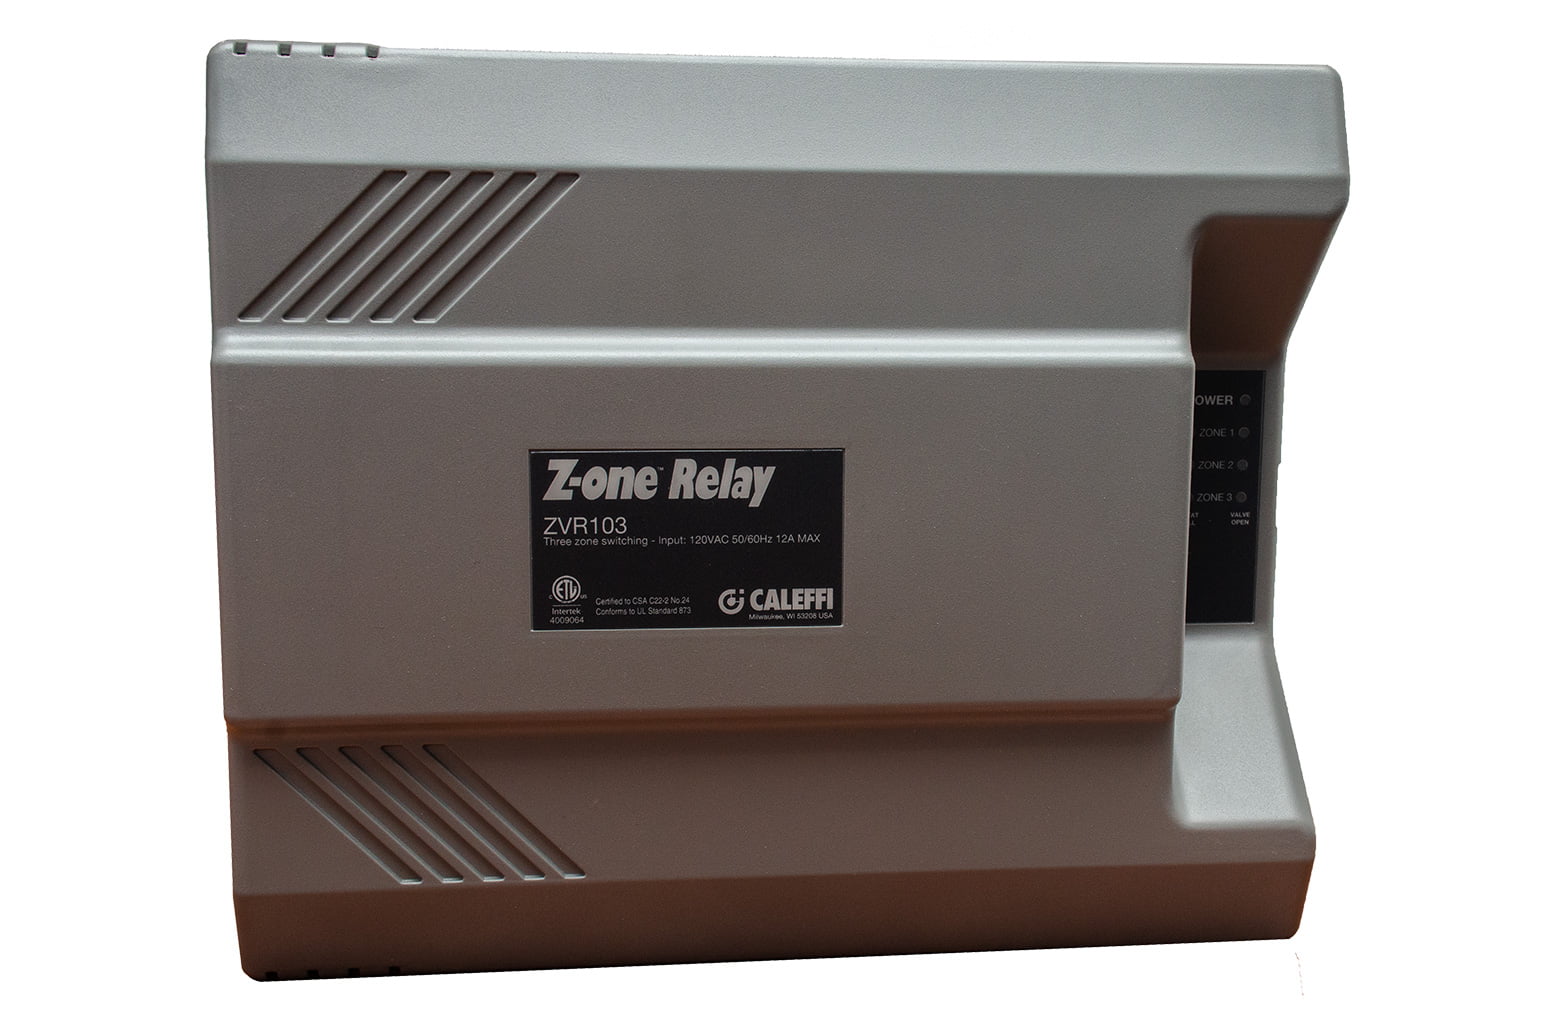 Caleffi ZVR103 zone relay for radiant floor heating system - front